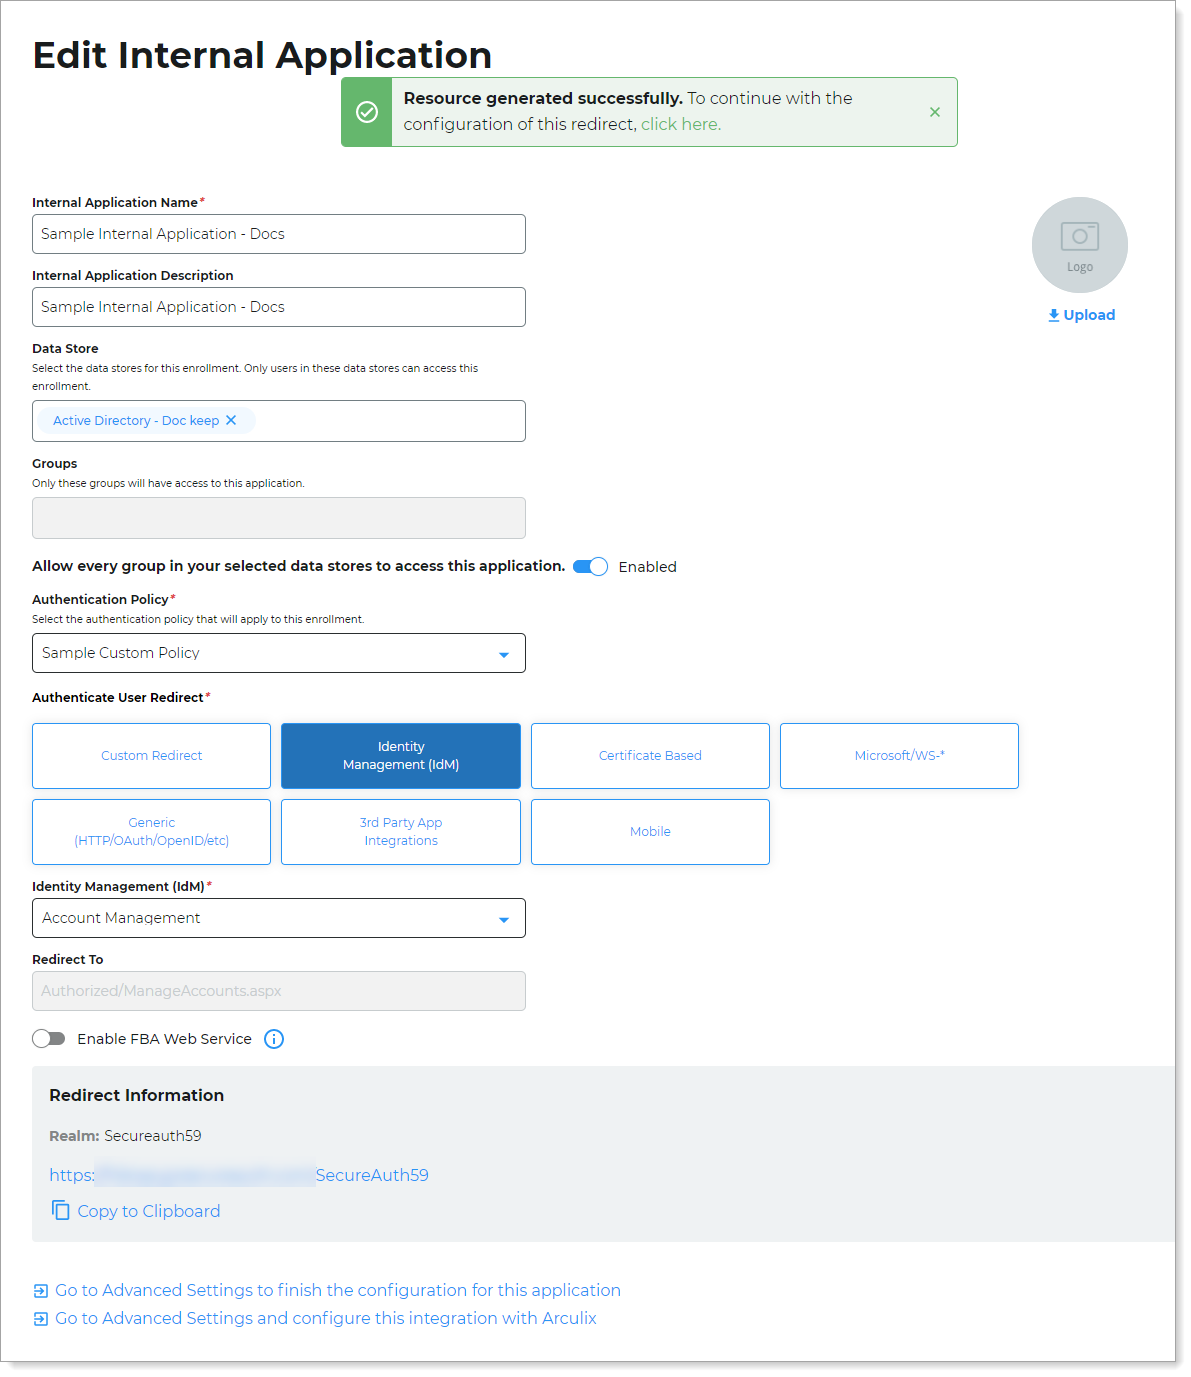 Screenshot of Secure Portal application configuration in the New Experience UI.